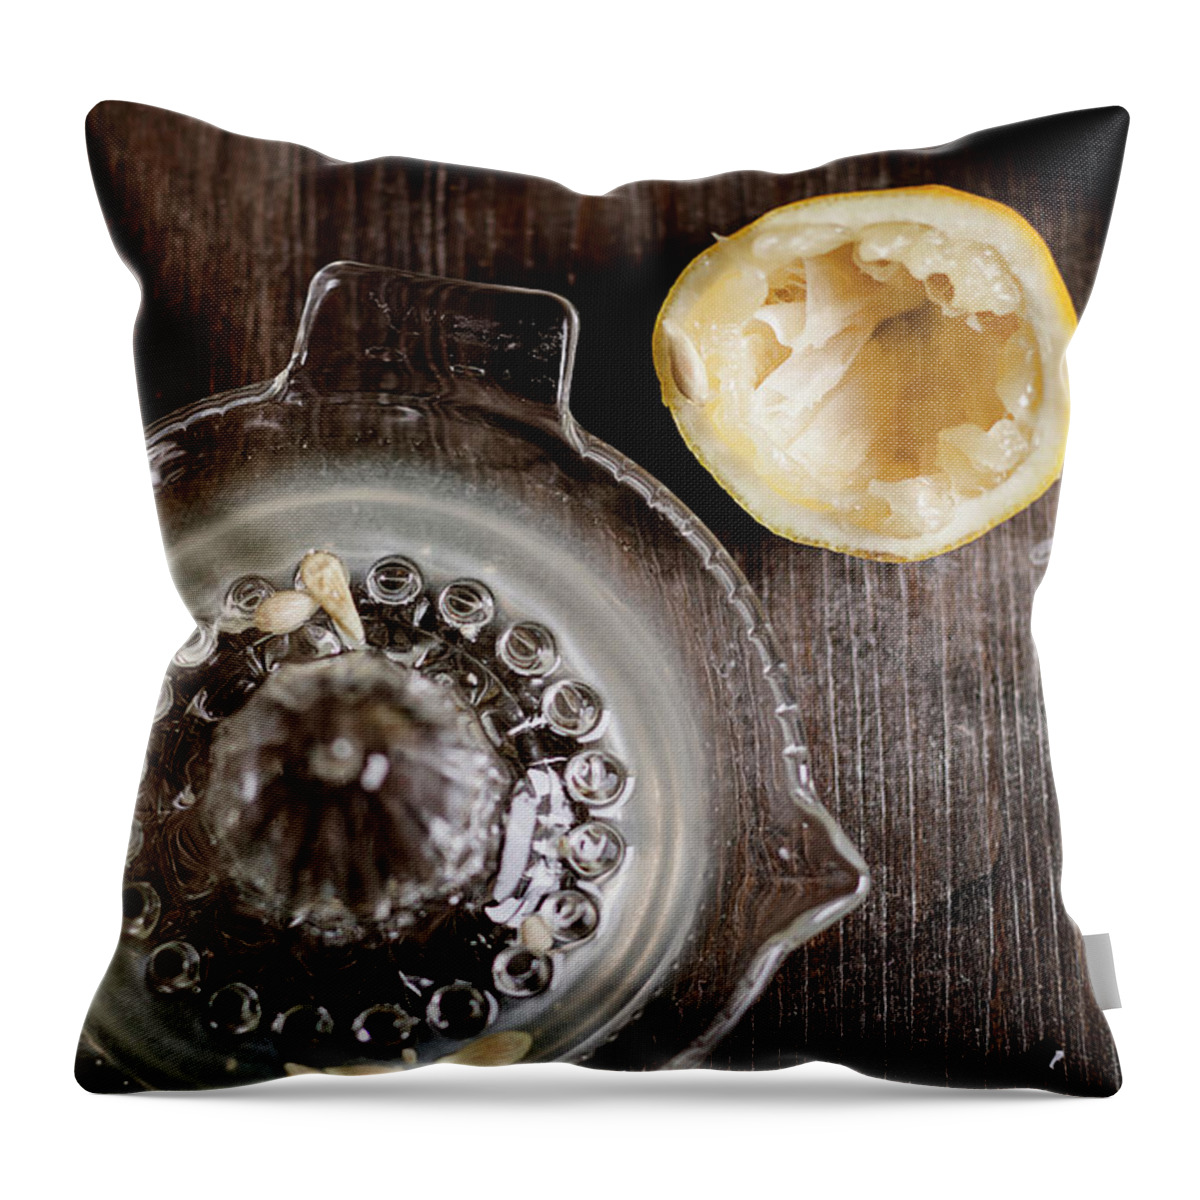 Empty Throw Pillow featuring the photograph Halfs Of Squeezed Lemon, Lemon Squeezer by Westend61